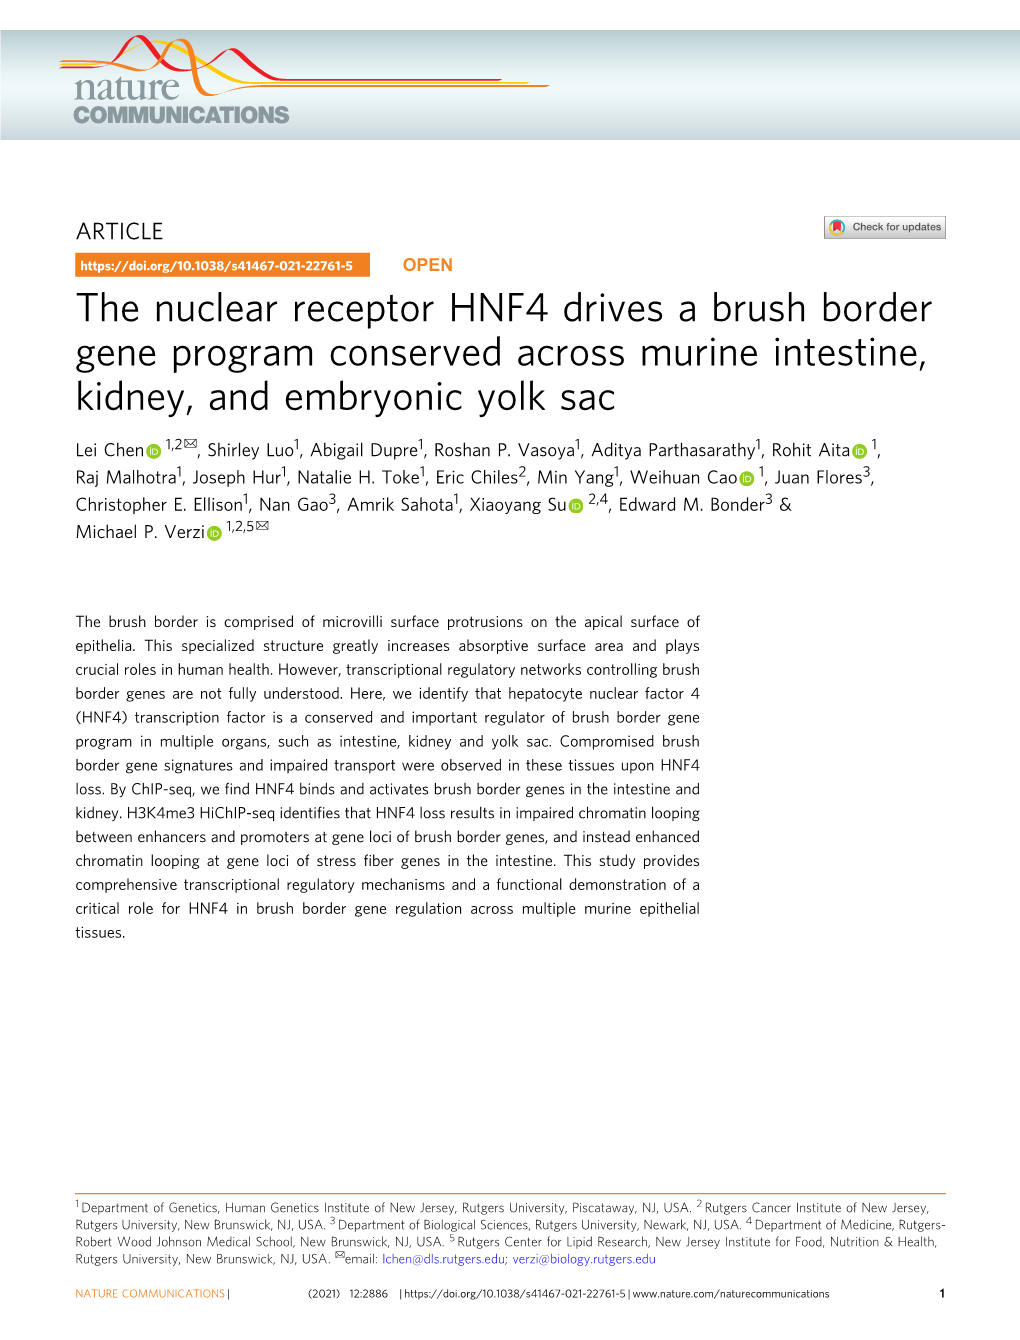 The Nuclear Receptor HNF4 Drives a Brush Border Gene Program Conserved Across Murine Intestine, Kidney, and Embryonic Yolk